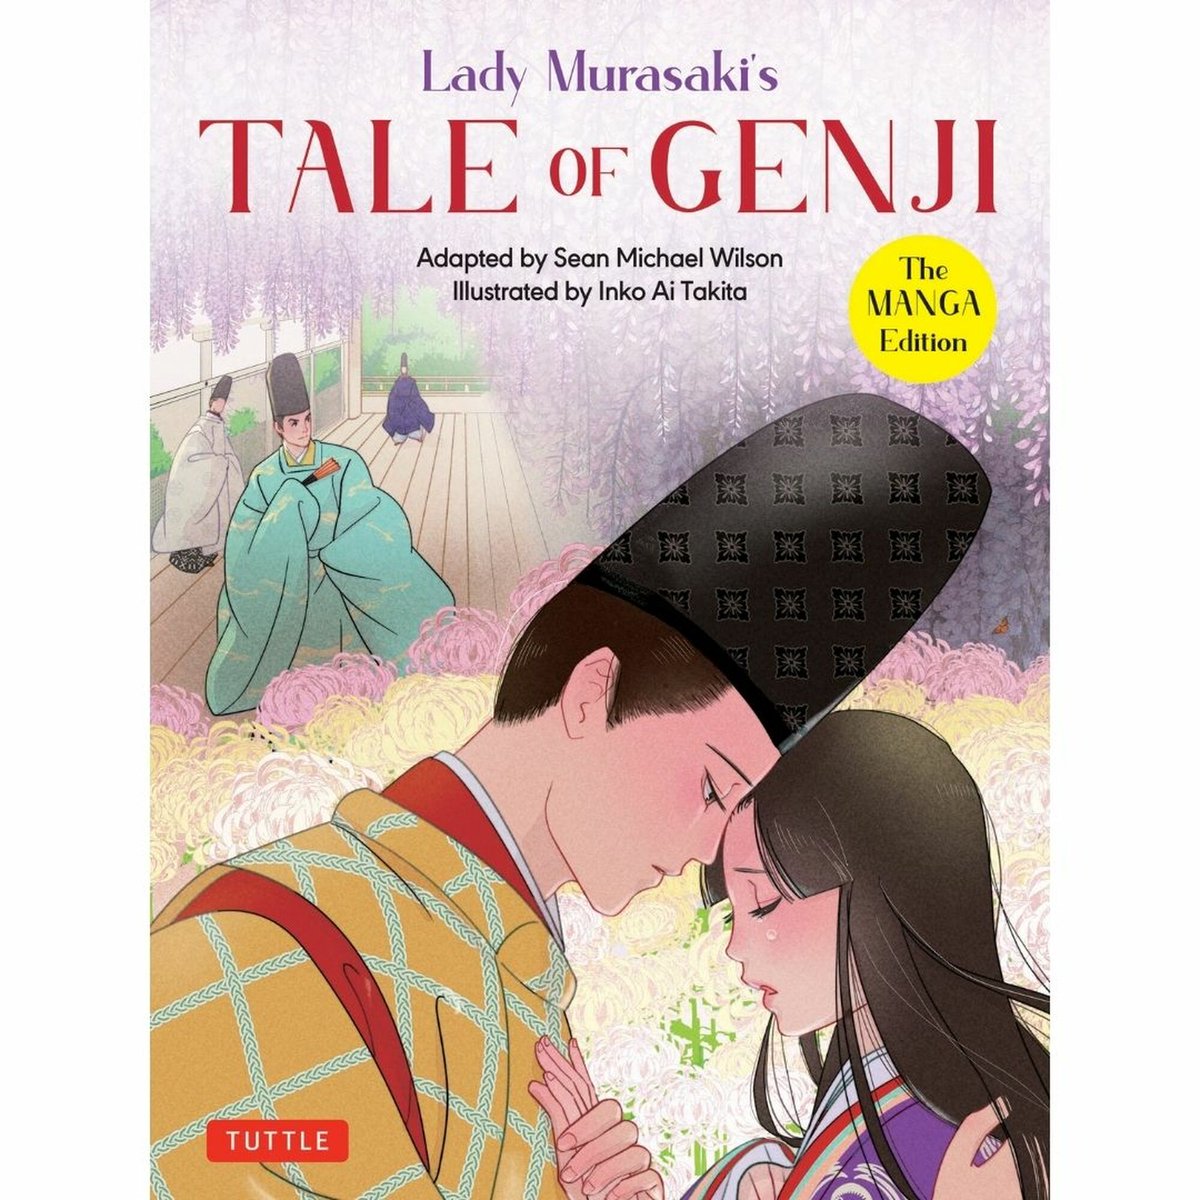 'She is hardly a stately person, and her poetry is somewhat crude... Yet she has a special charm. Well , whatever it is, that is how I feel.'  #taleofgenji 